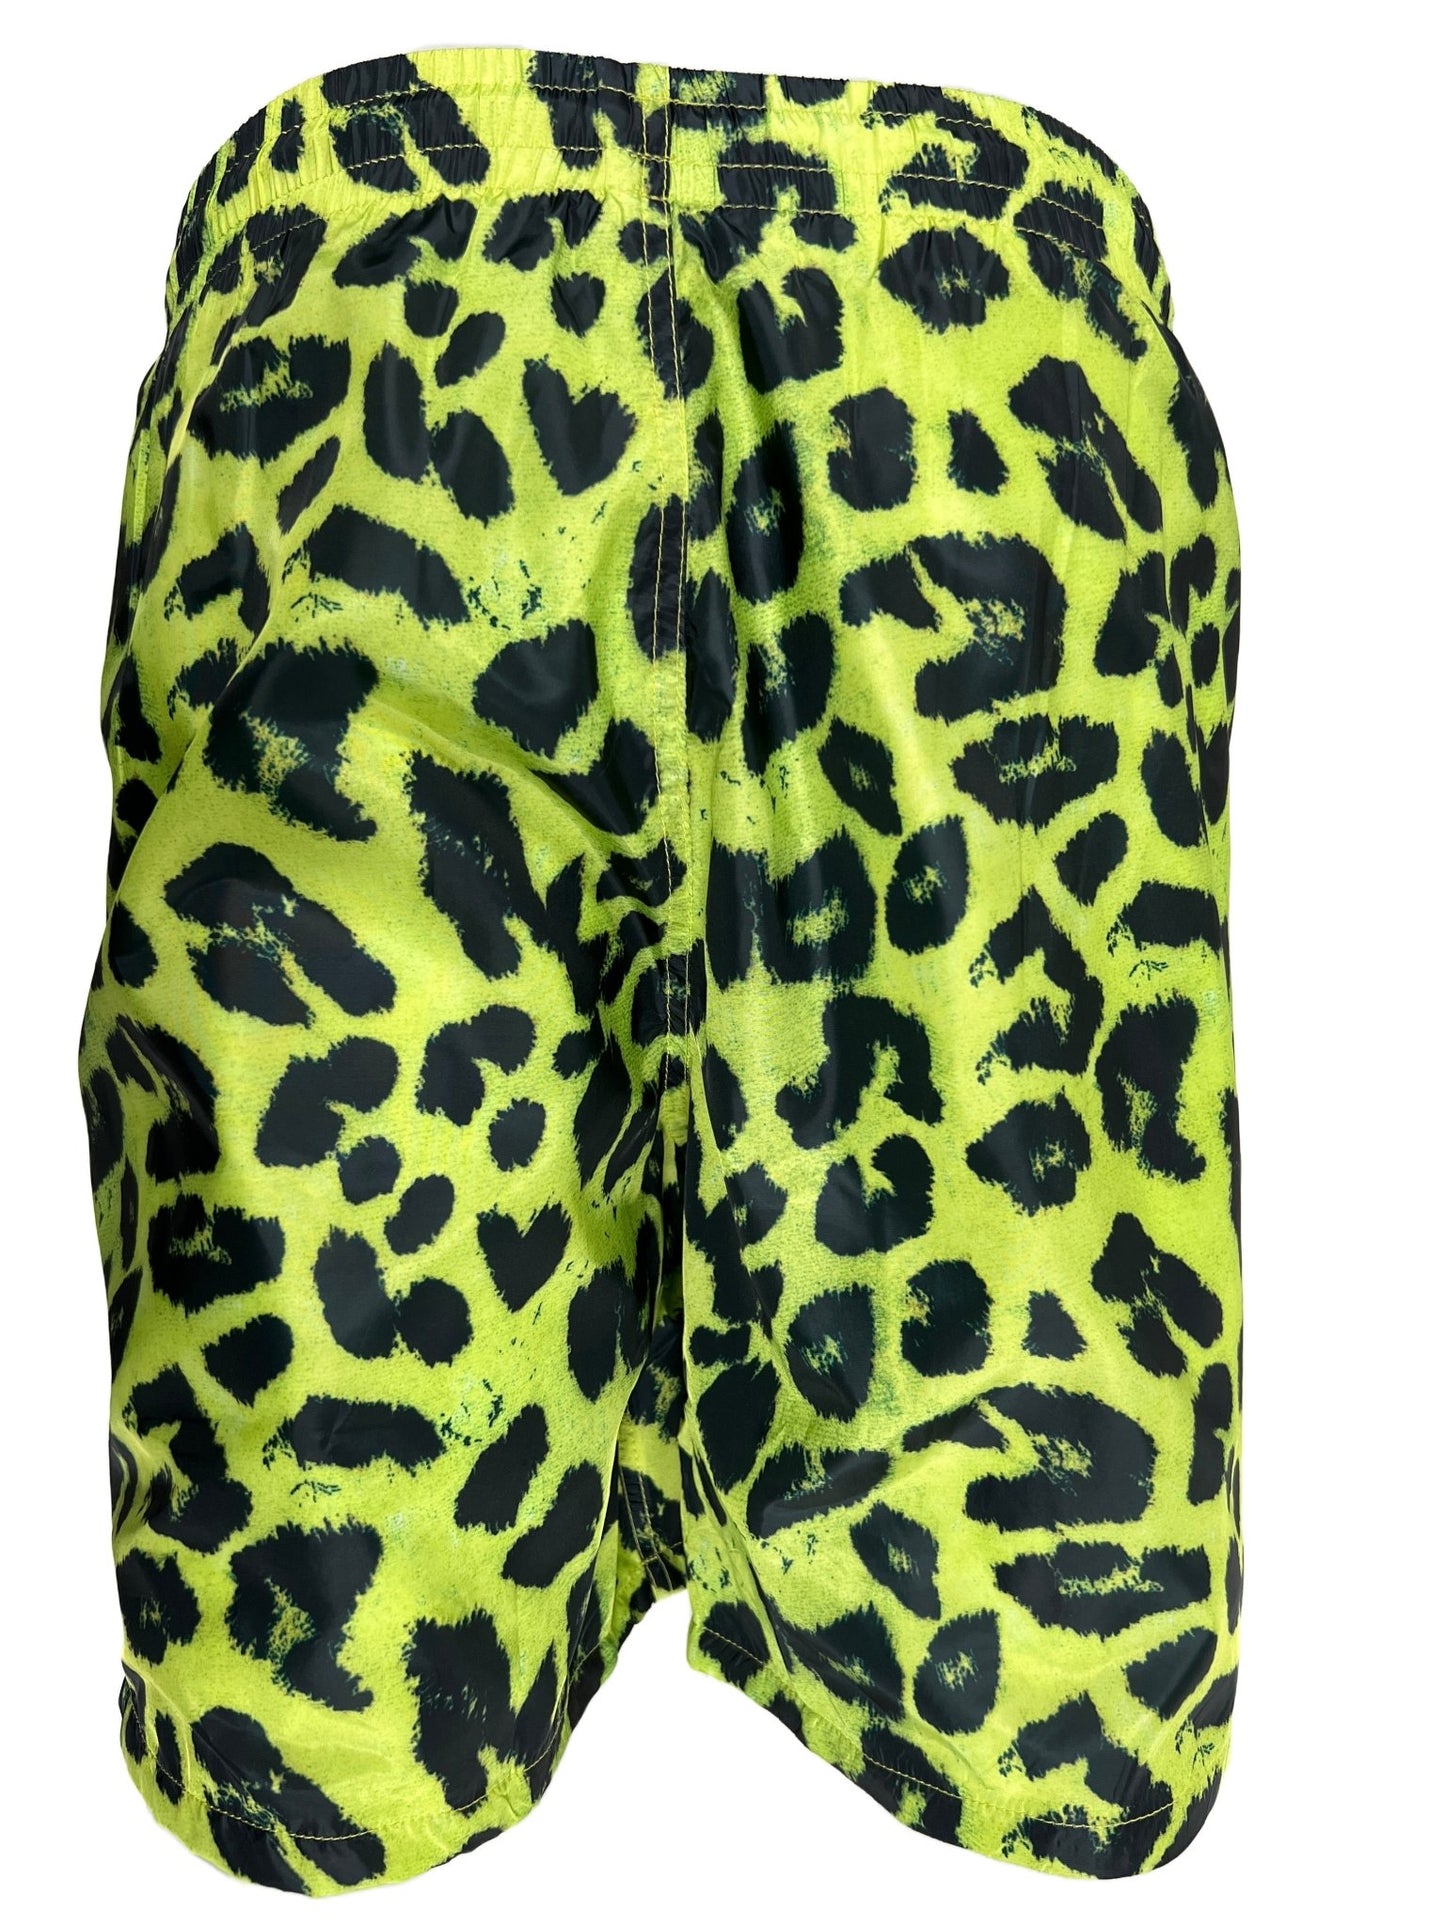 Relaxed fit PLEASURES LEOPARD RUNNING SHORT LIME swim shorts in Polyester fabric.